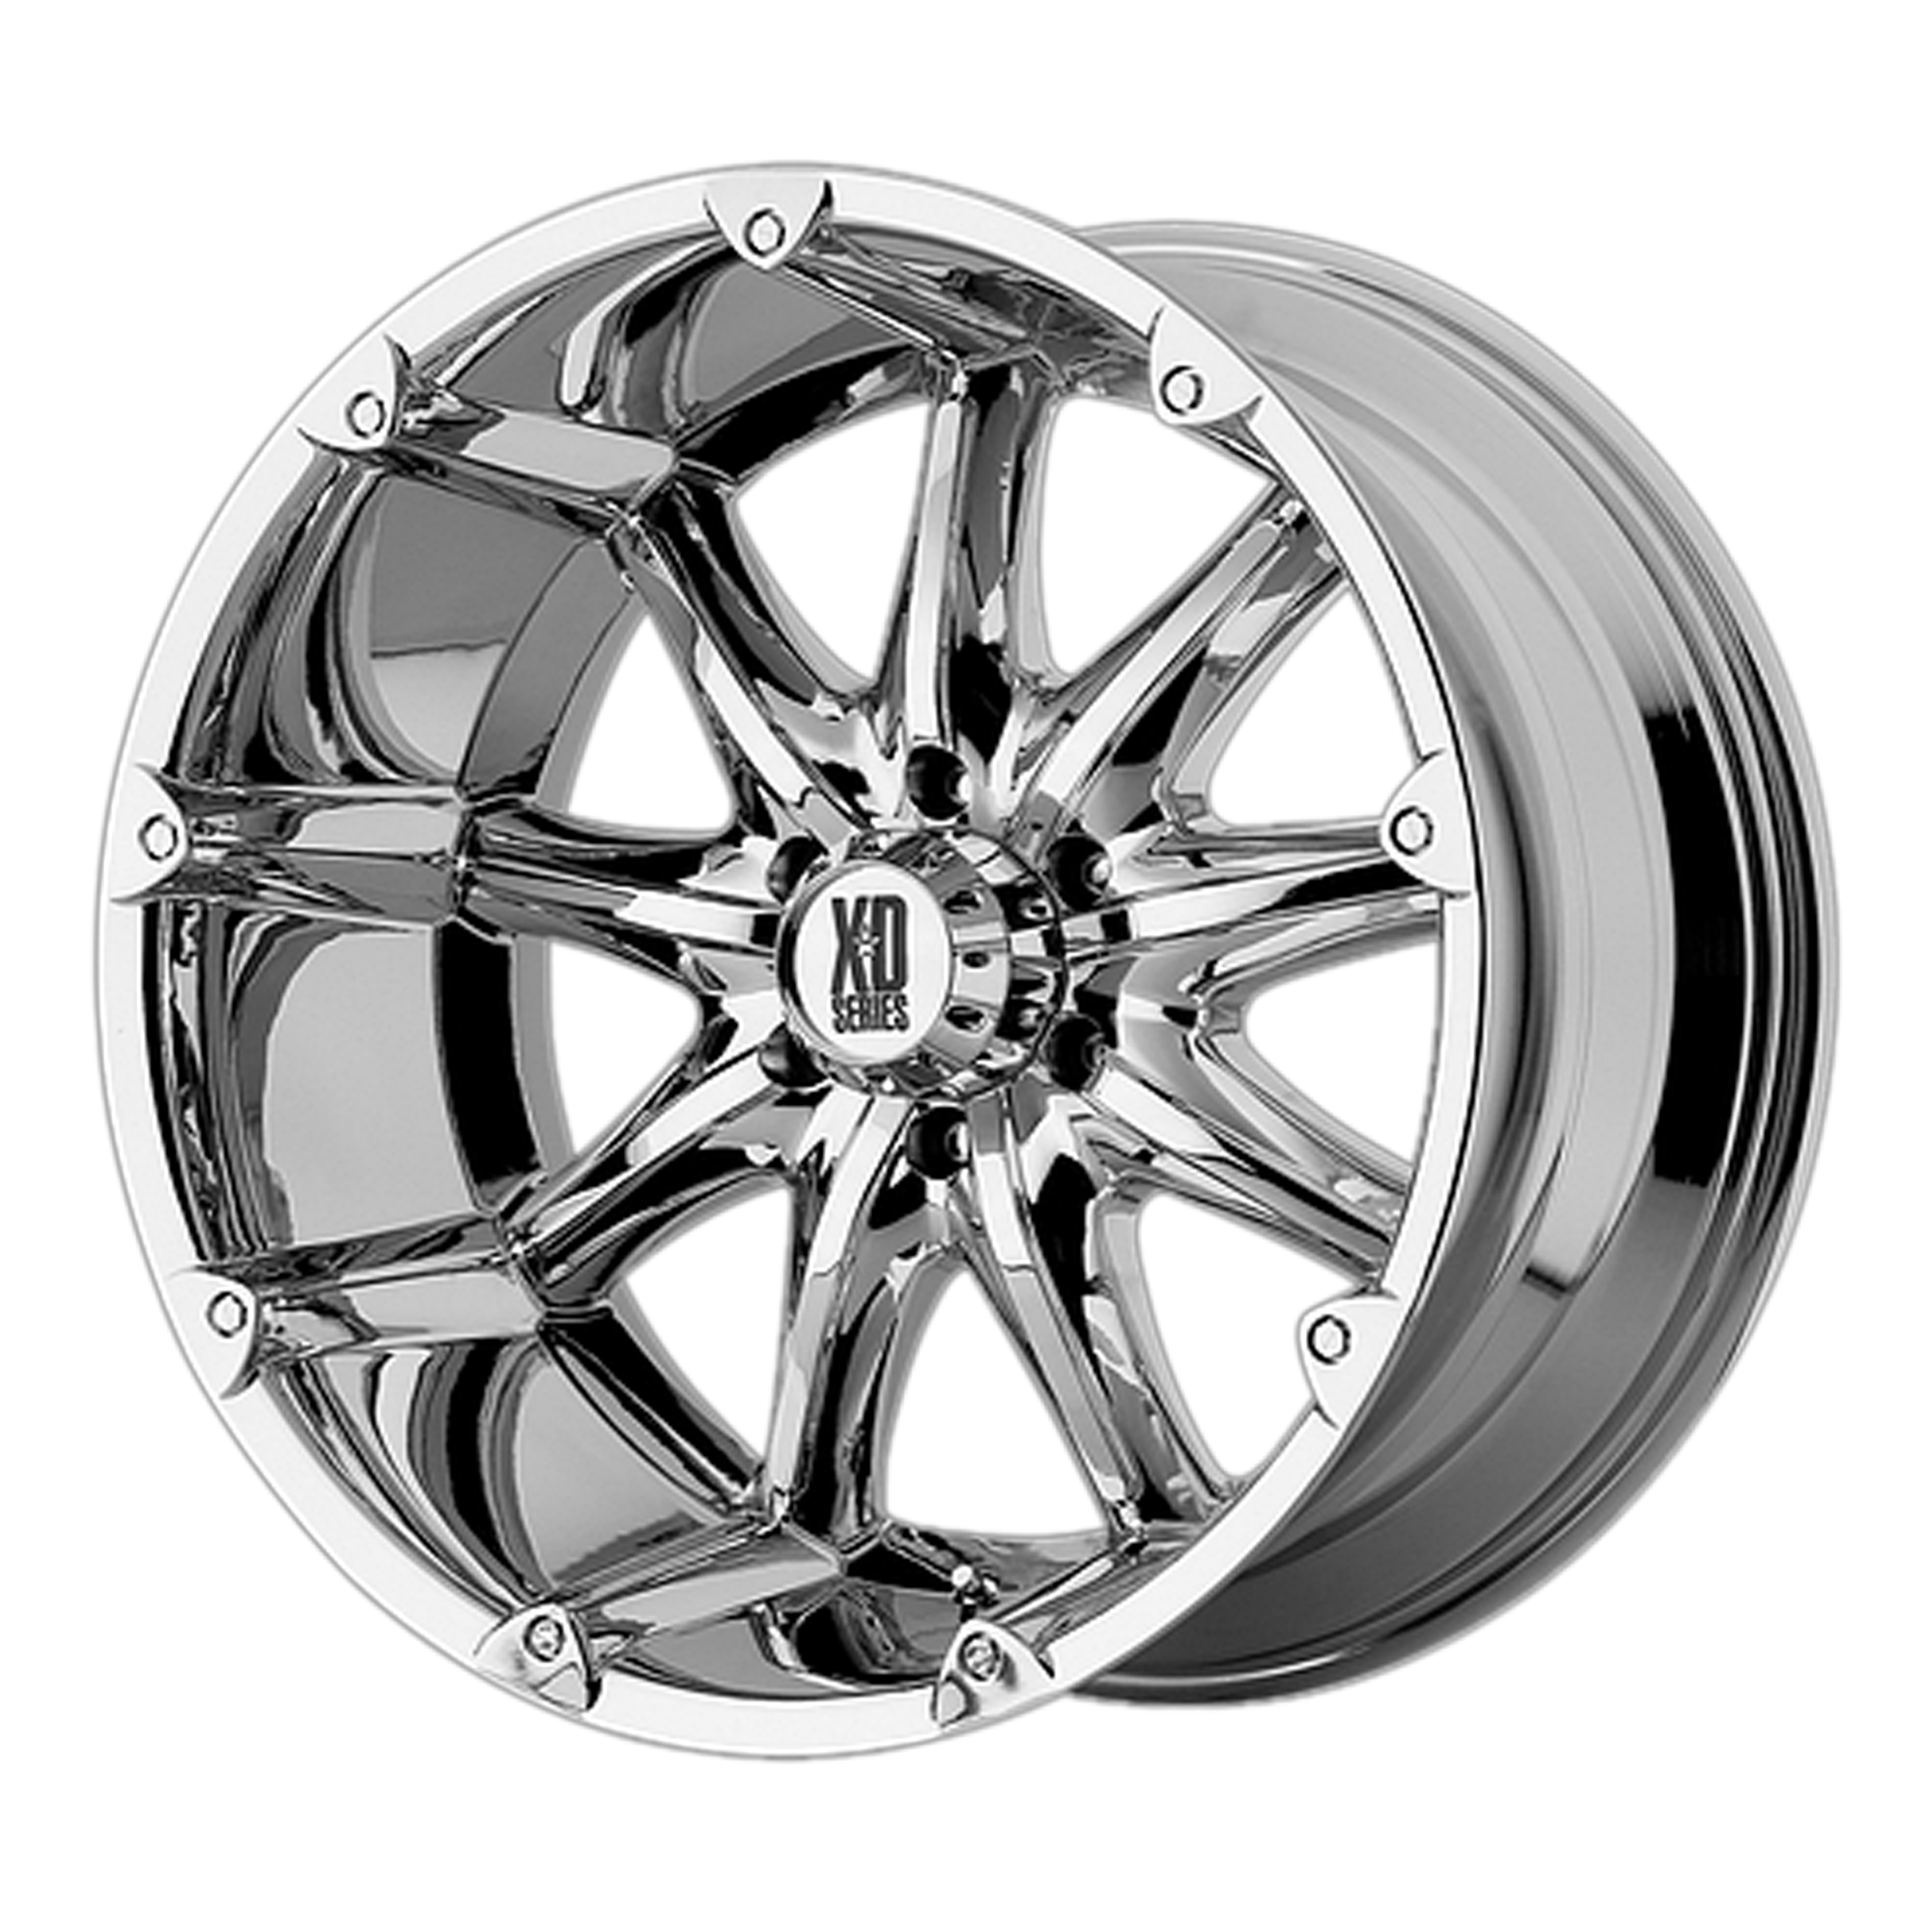 BADLANDS 20x9 6x135.00 CHROME (18 mm) - Tires and Engine Performance